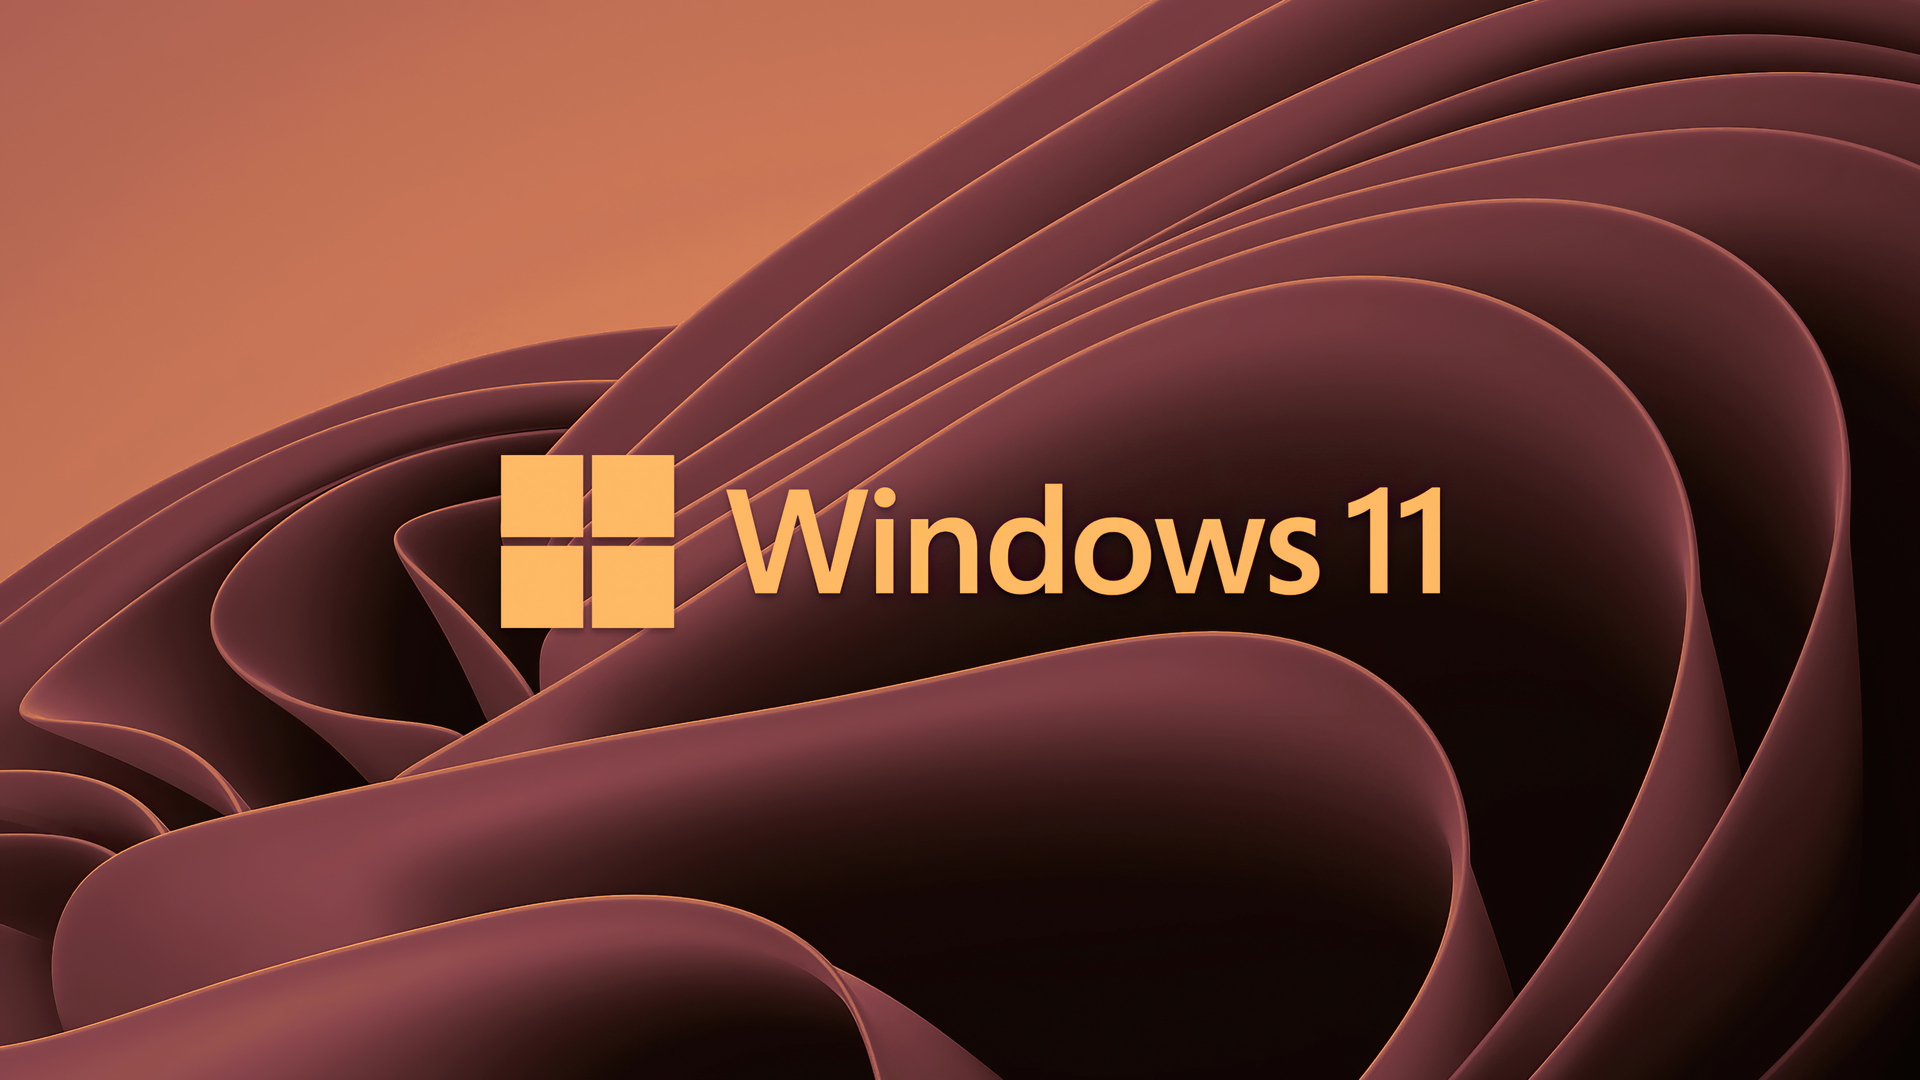  Windows 11  4K backgrounds  wallpapers  backgrounds